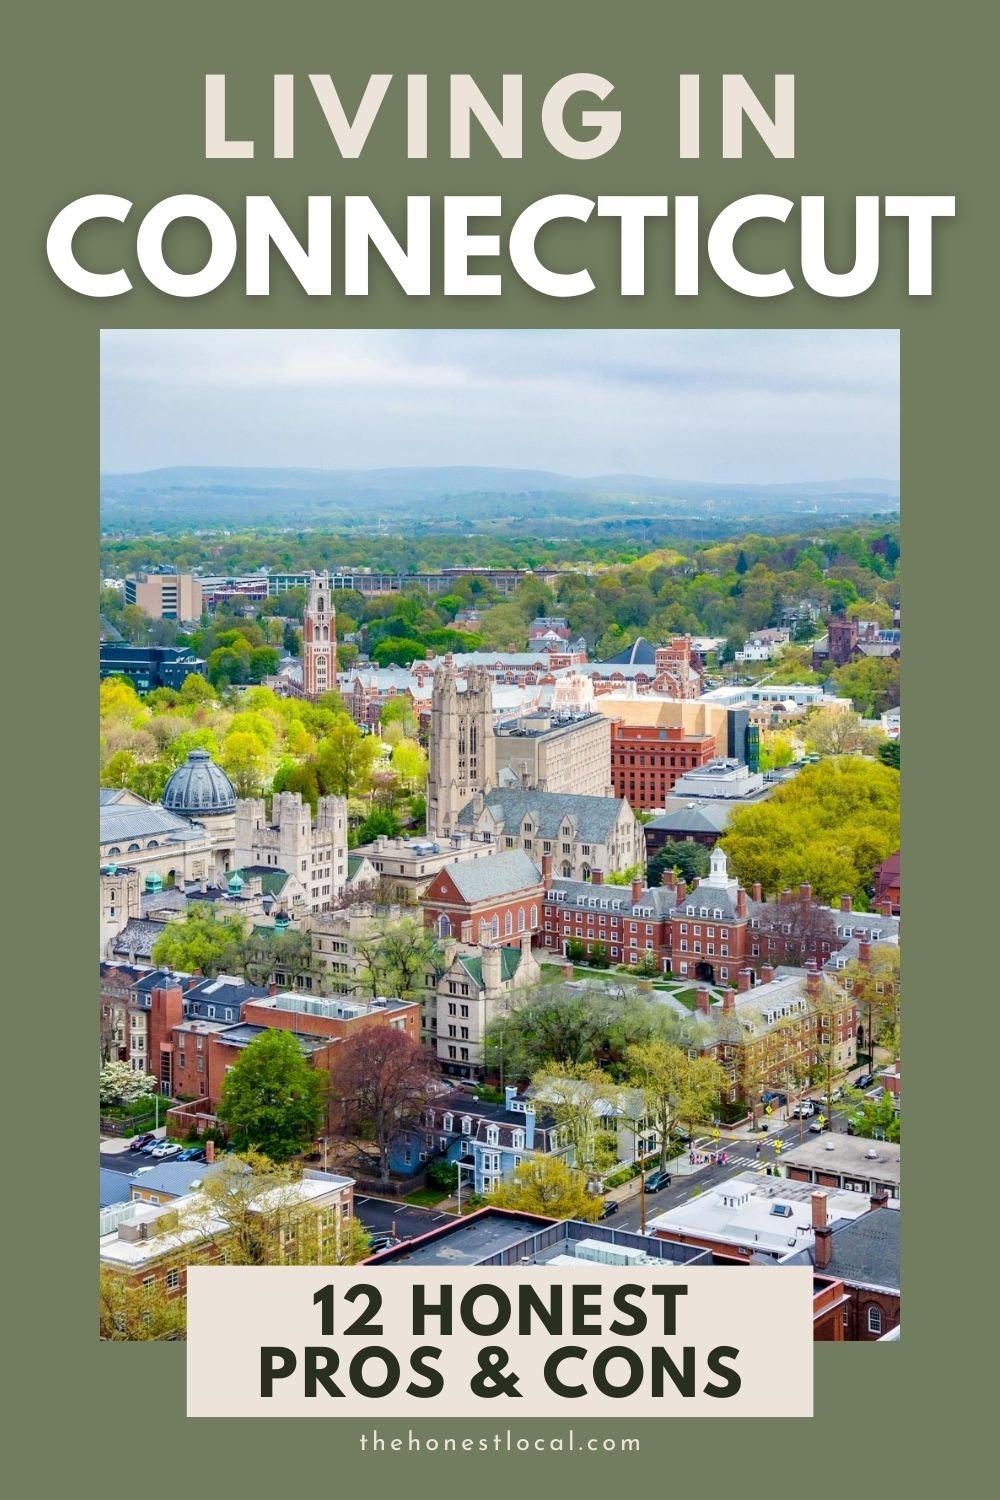 Pros and cons of living in Connecticut